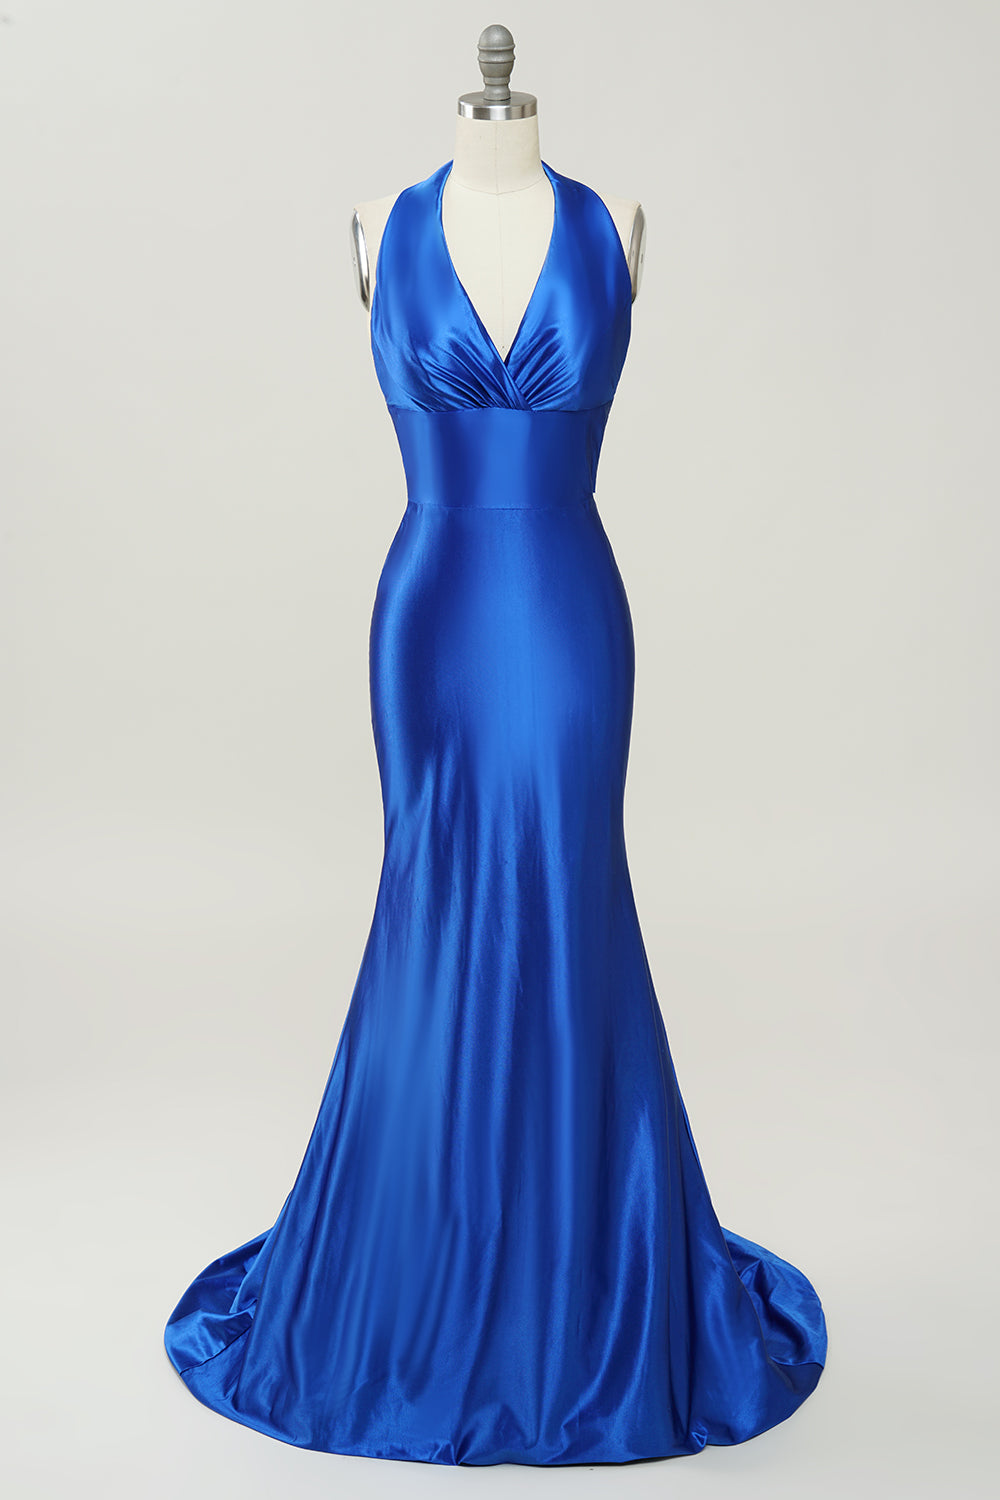 Bridesmaid Dresses Ideas, Royal Blue Halter Lace Up Backless Prom Dress